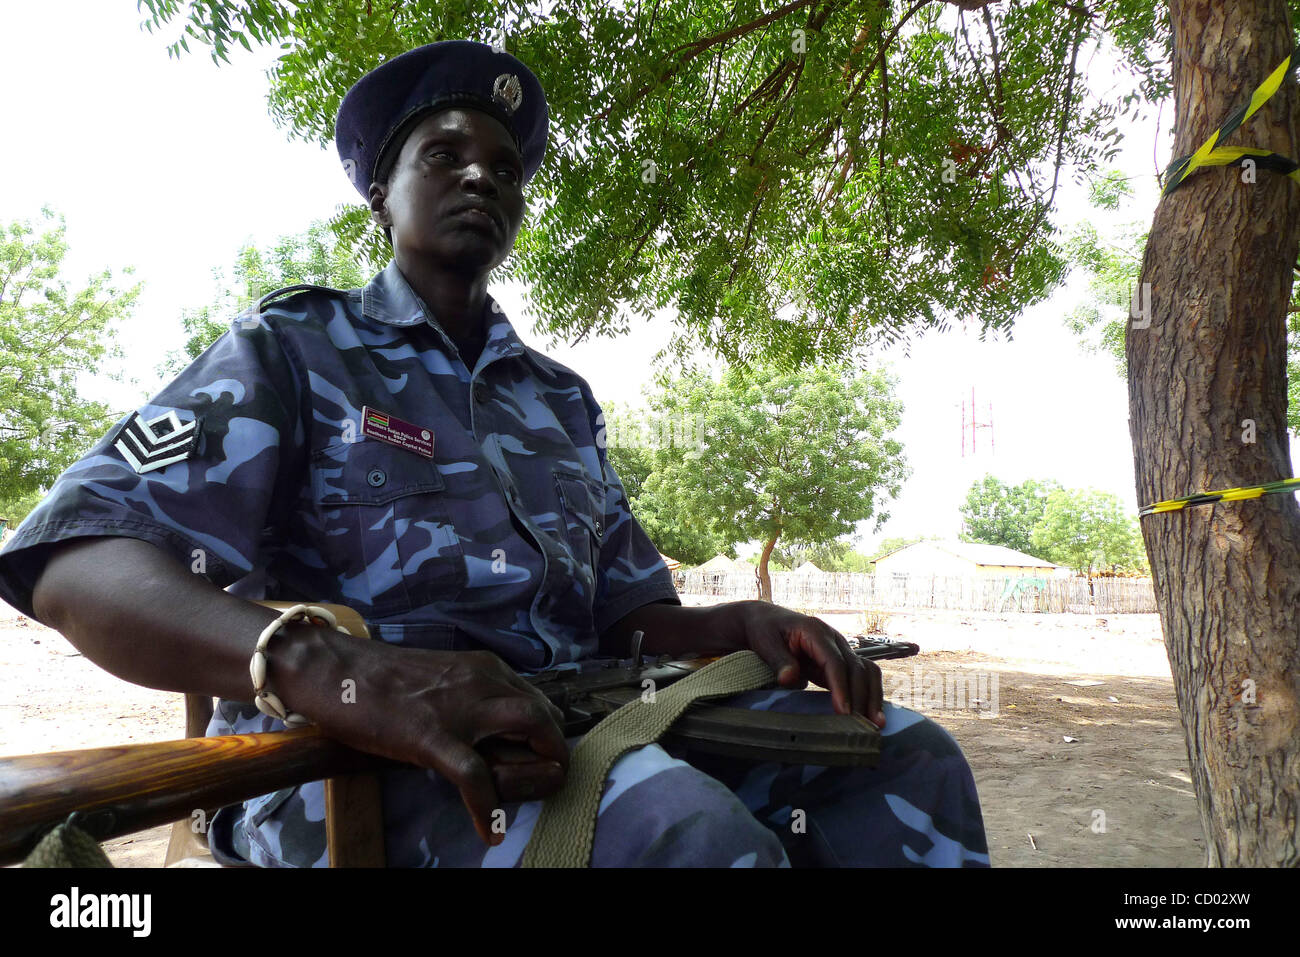 Apr 12, 2010 - Rumbek, Sudan - An armed Southern Sudanese policewoman guarding an election polling station in Rumbek. Second day of voting in the country's first democratic elections in 24 years. The polls, held from April 11-13, are part of a 2005 peace agreement signed between the Arab north and t Stock Photo